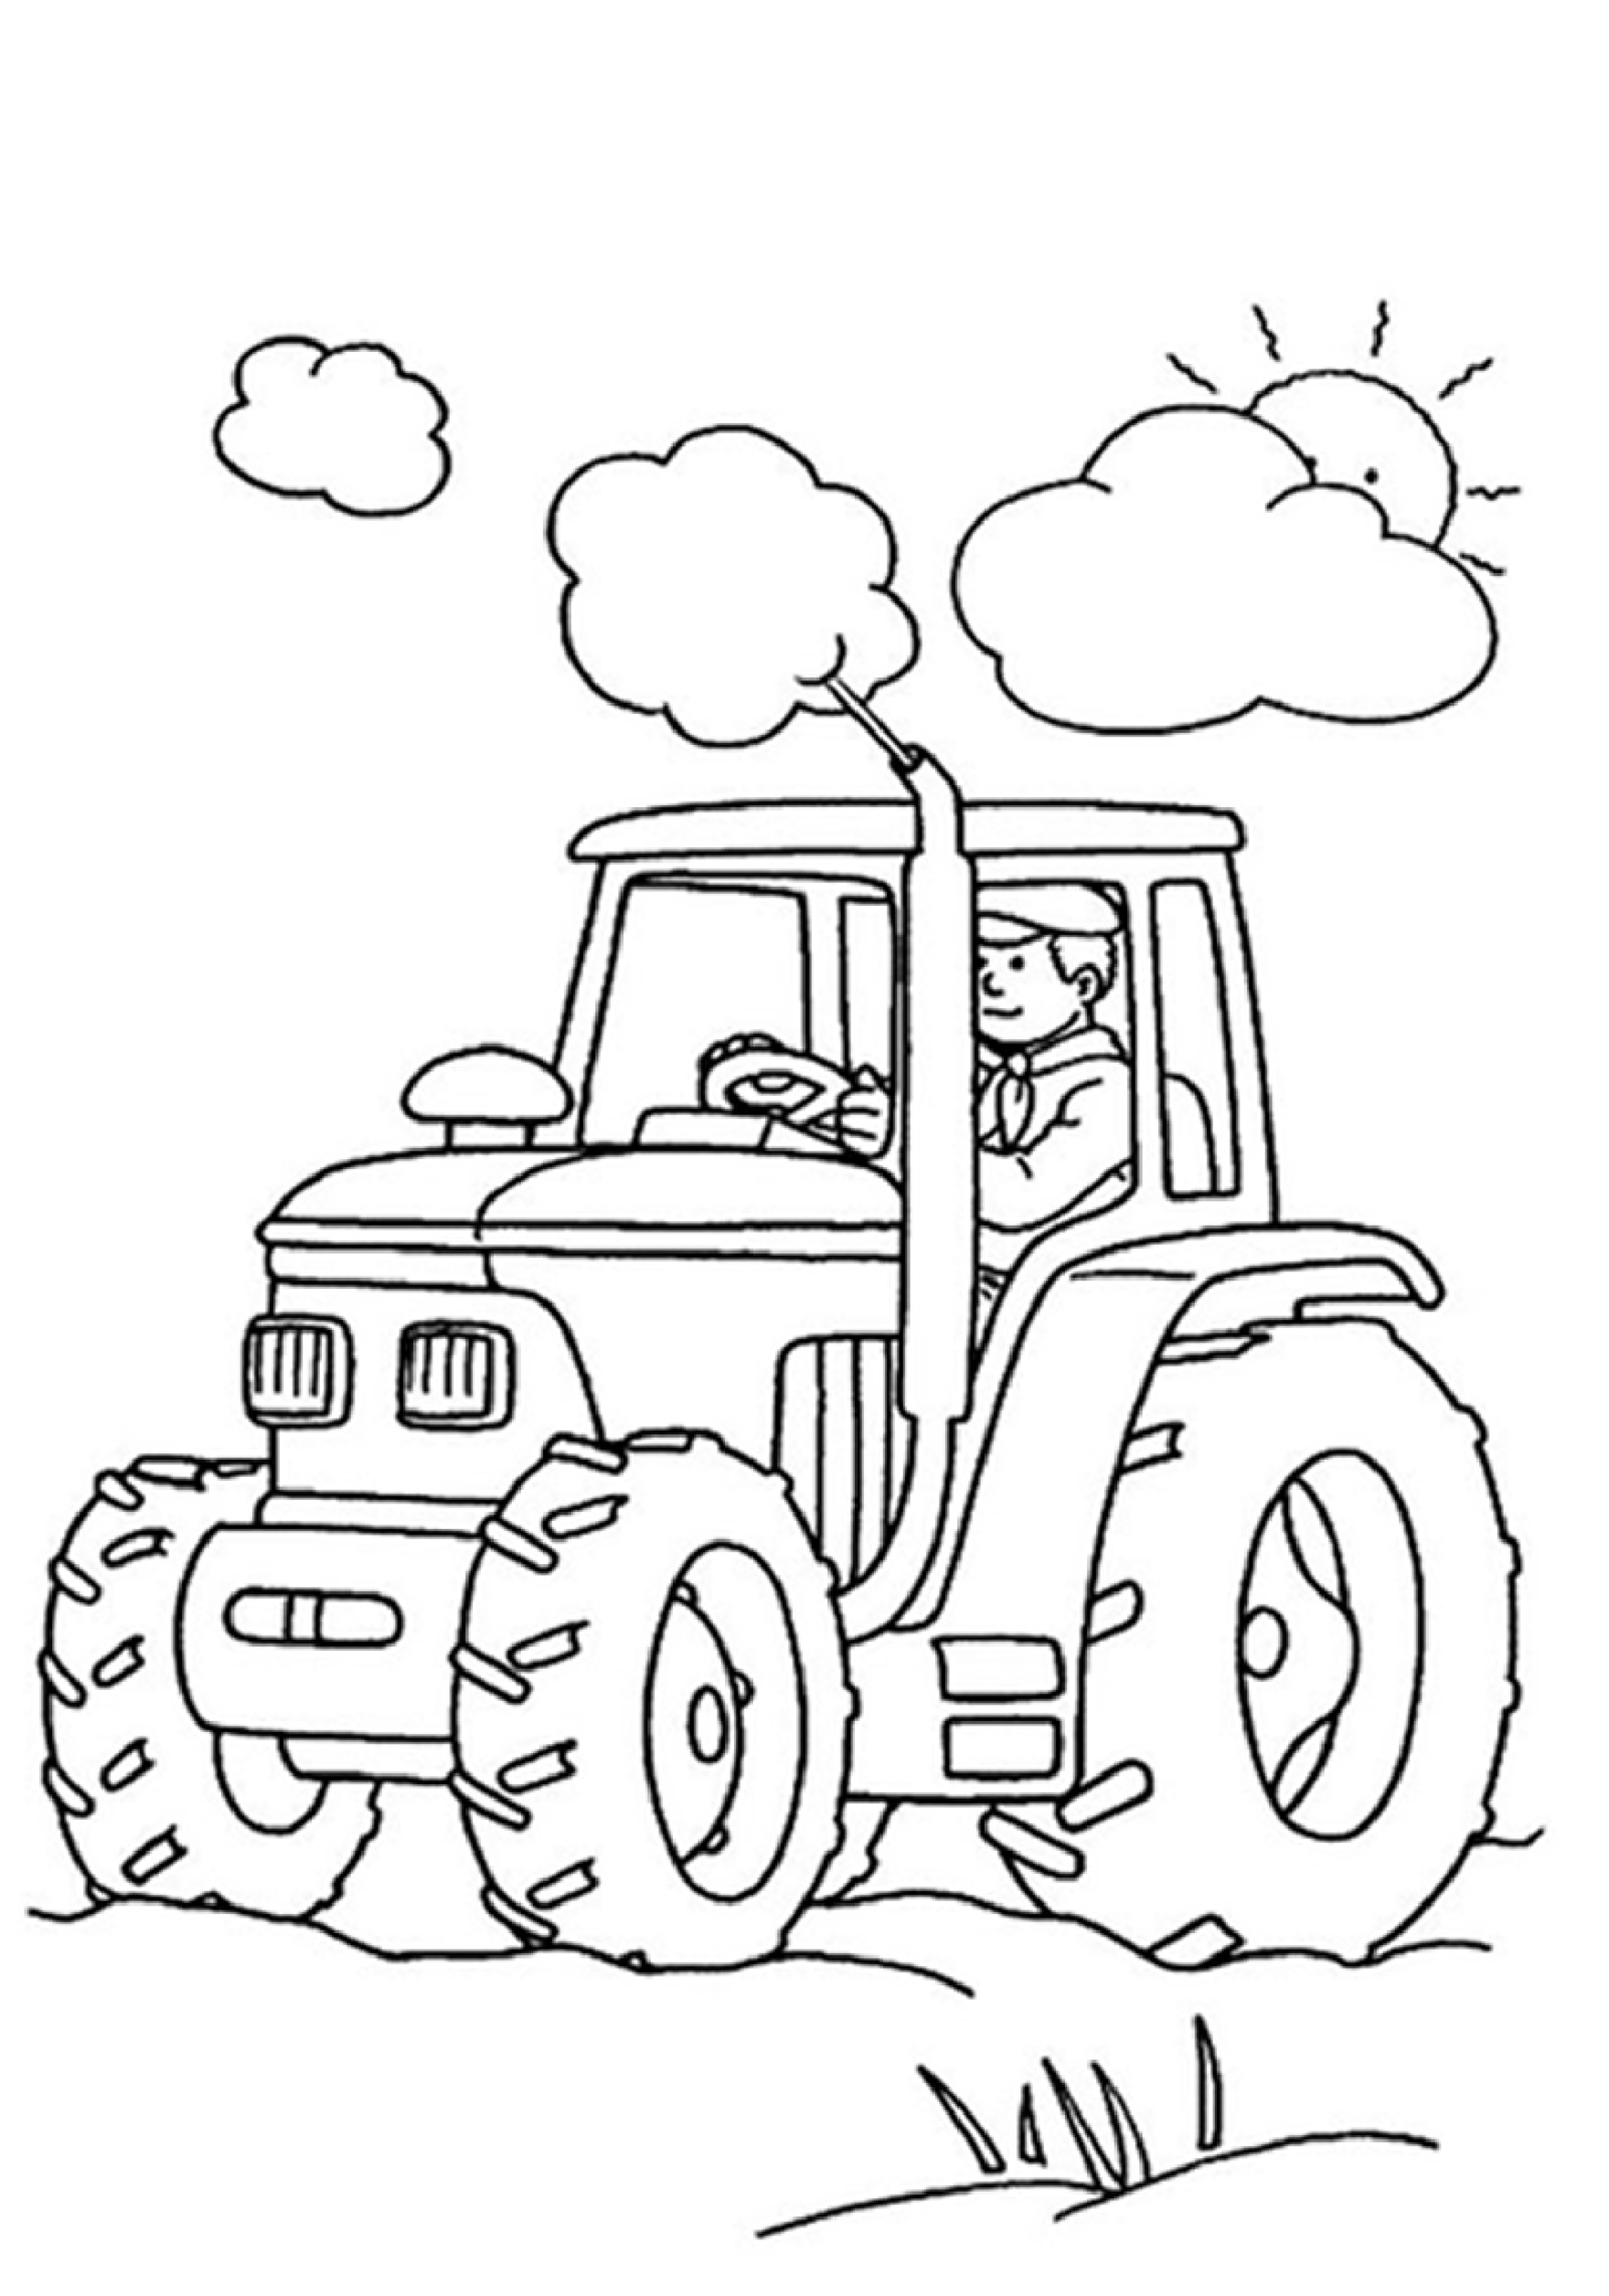 Fun Coloring Pages For Boys
 Coloring pages for boys